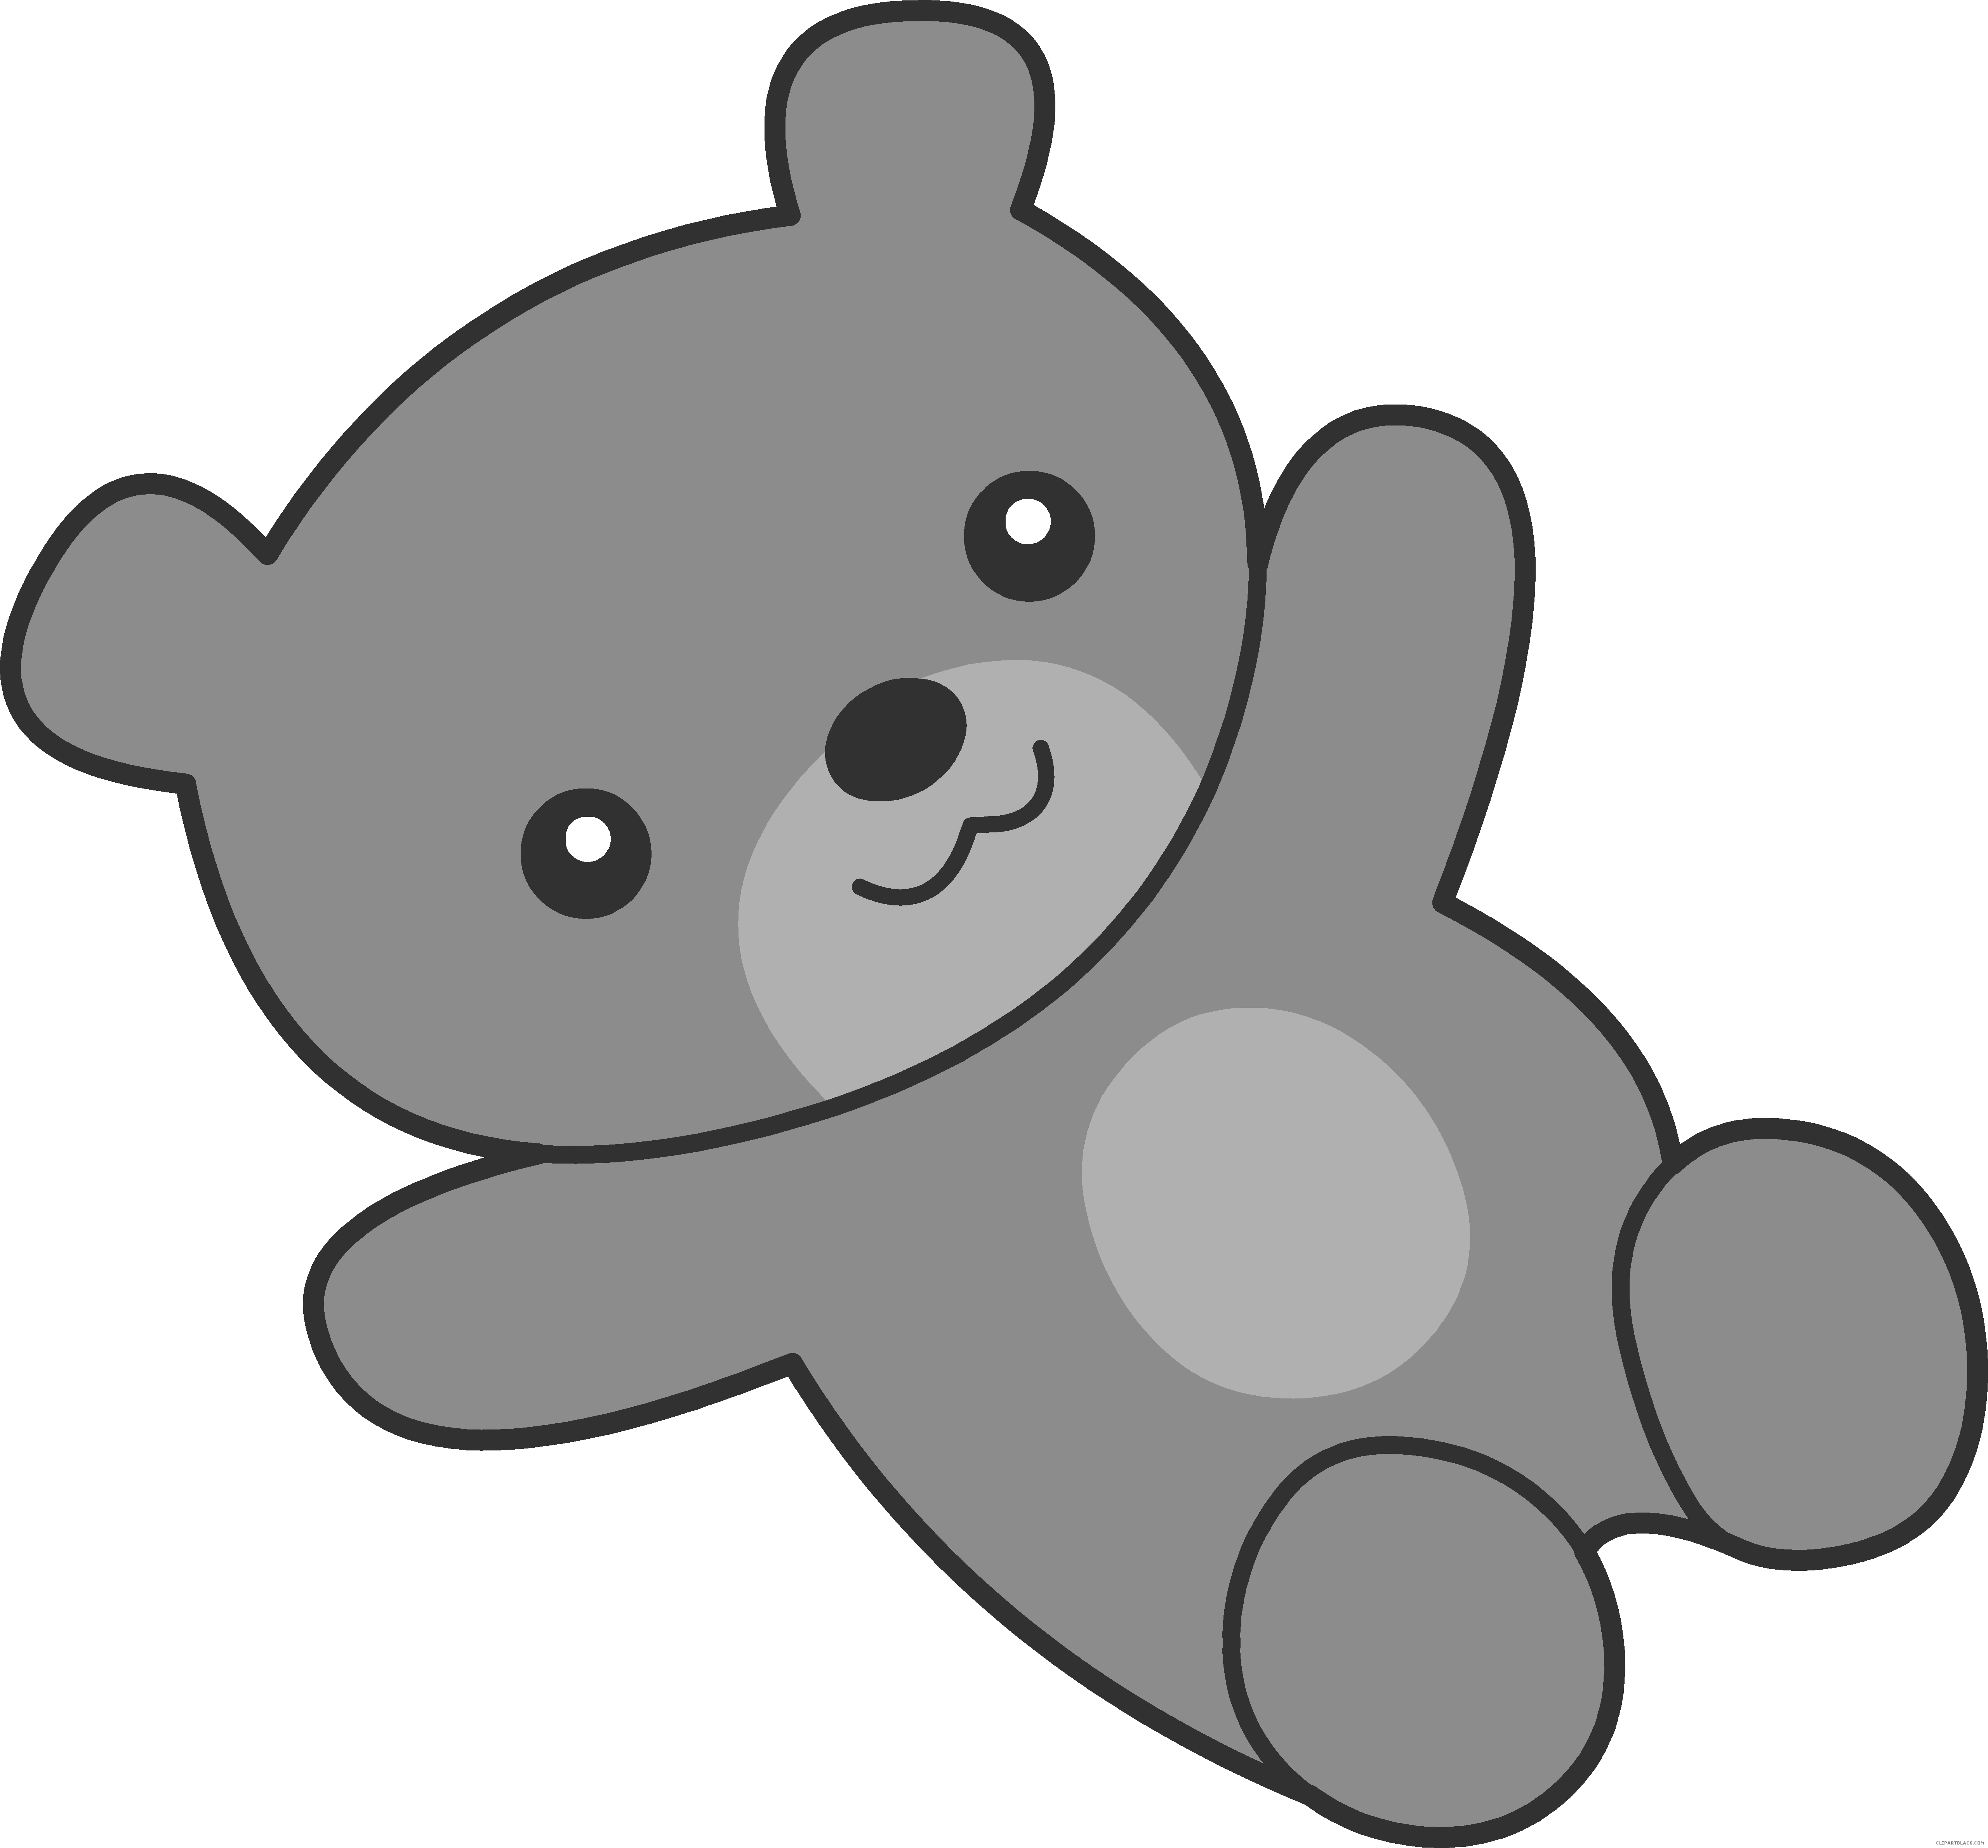 Cute Bear Animal Free Black White Clipart Images Clipartblack - Teddy Bear Baby Cartoon Png (5120x4760)